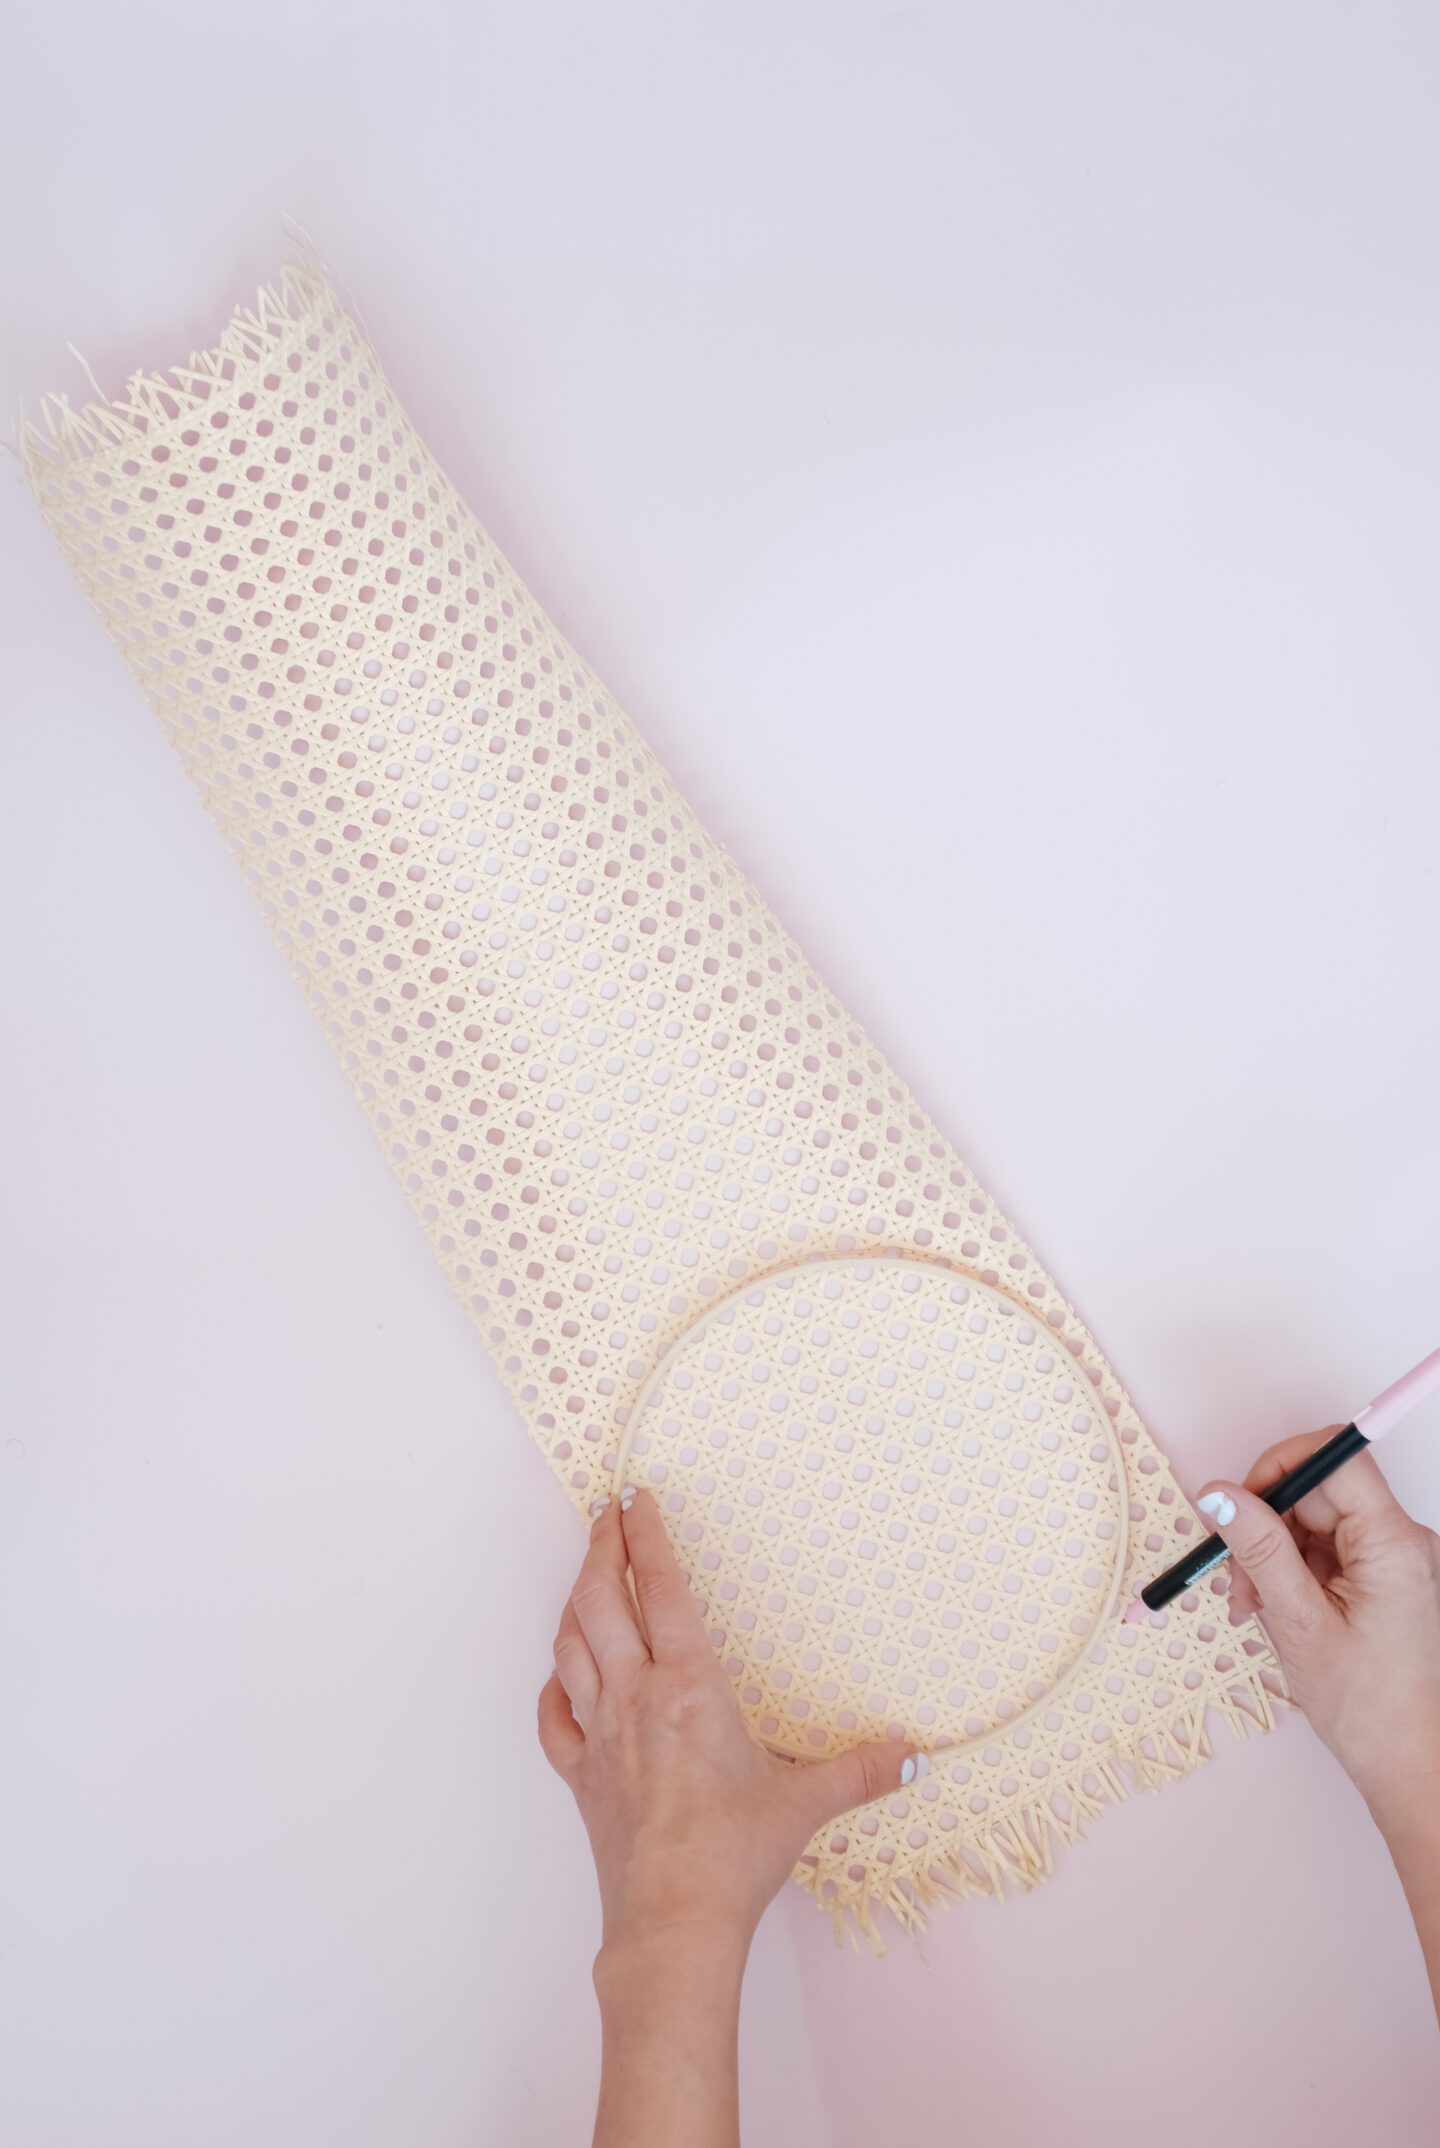 Rattan for a necklace organizer